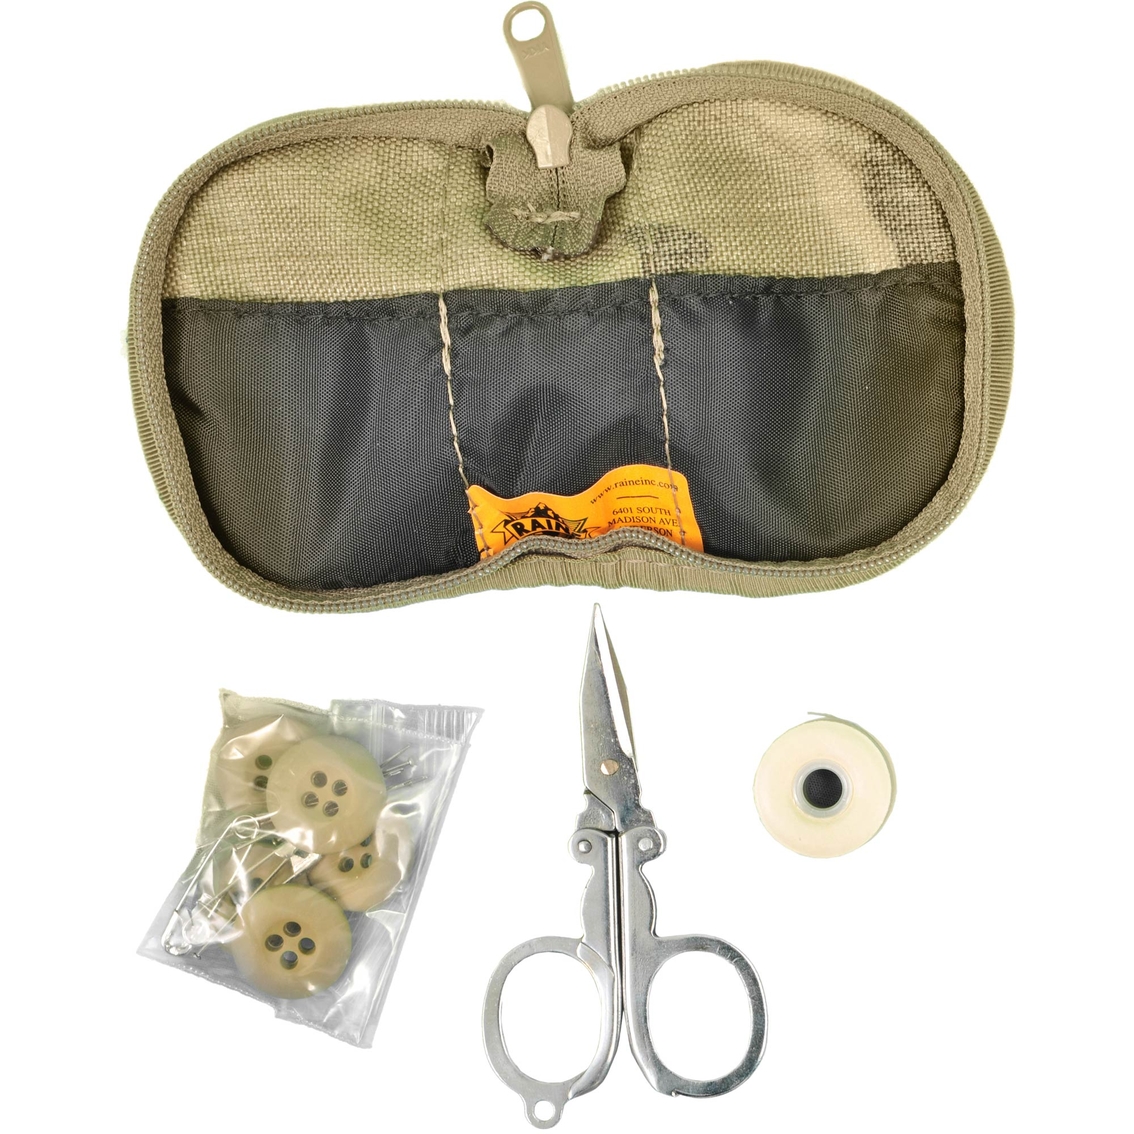 Raine Tactical Gear 0024B Military Sewing Kit - Black, Made in USA